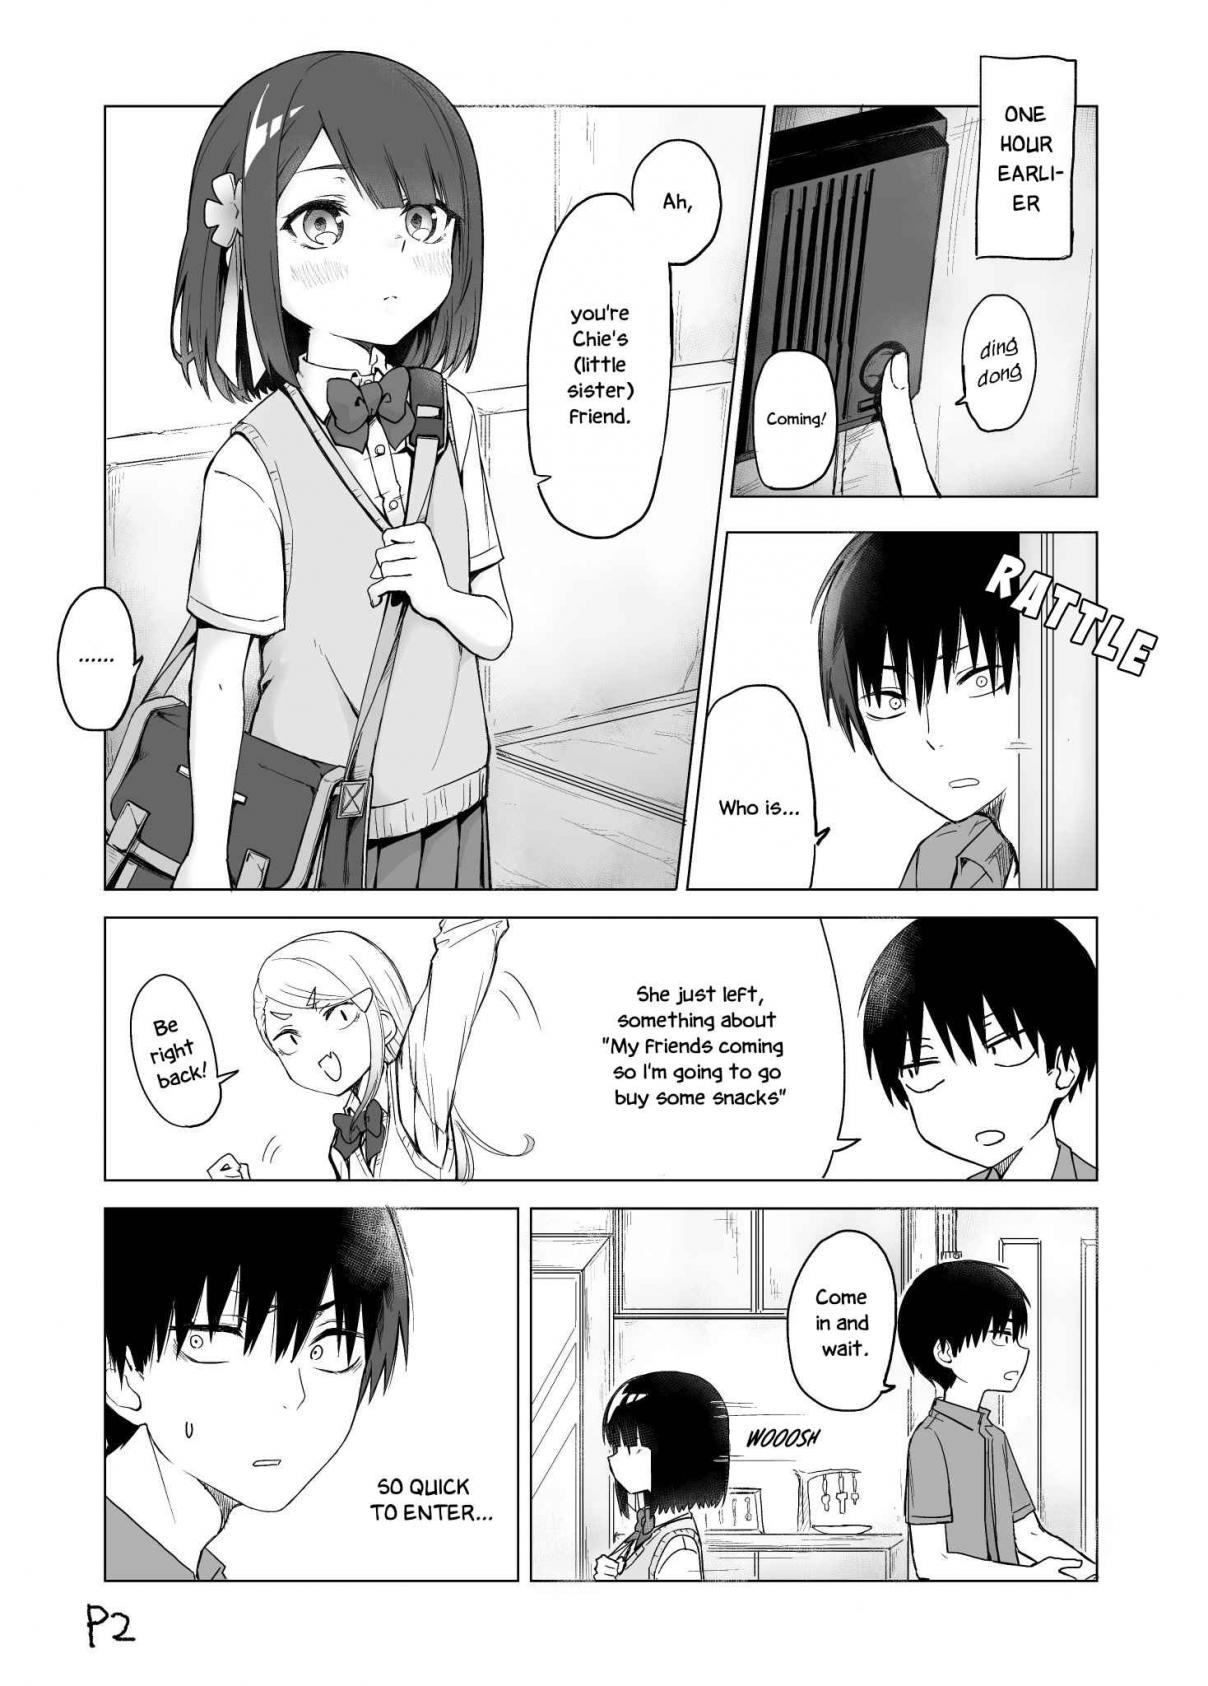 I don't know what my little sister's friend is thinking! Ch. 1